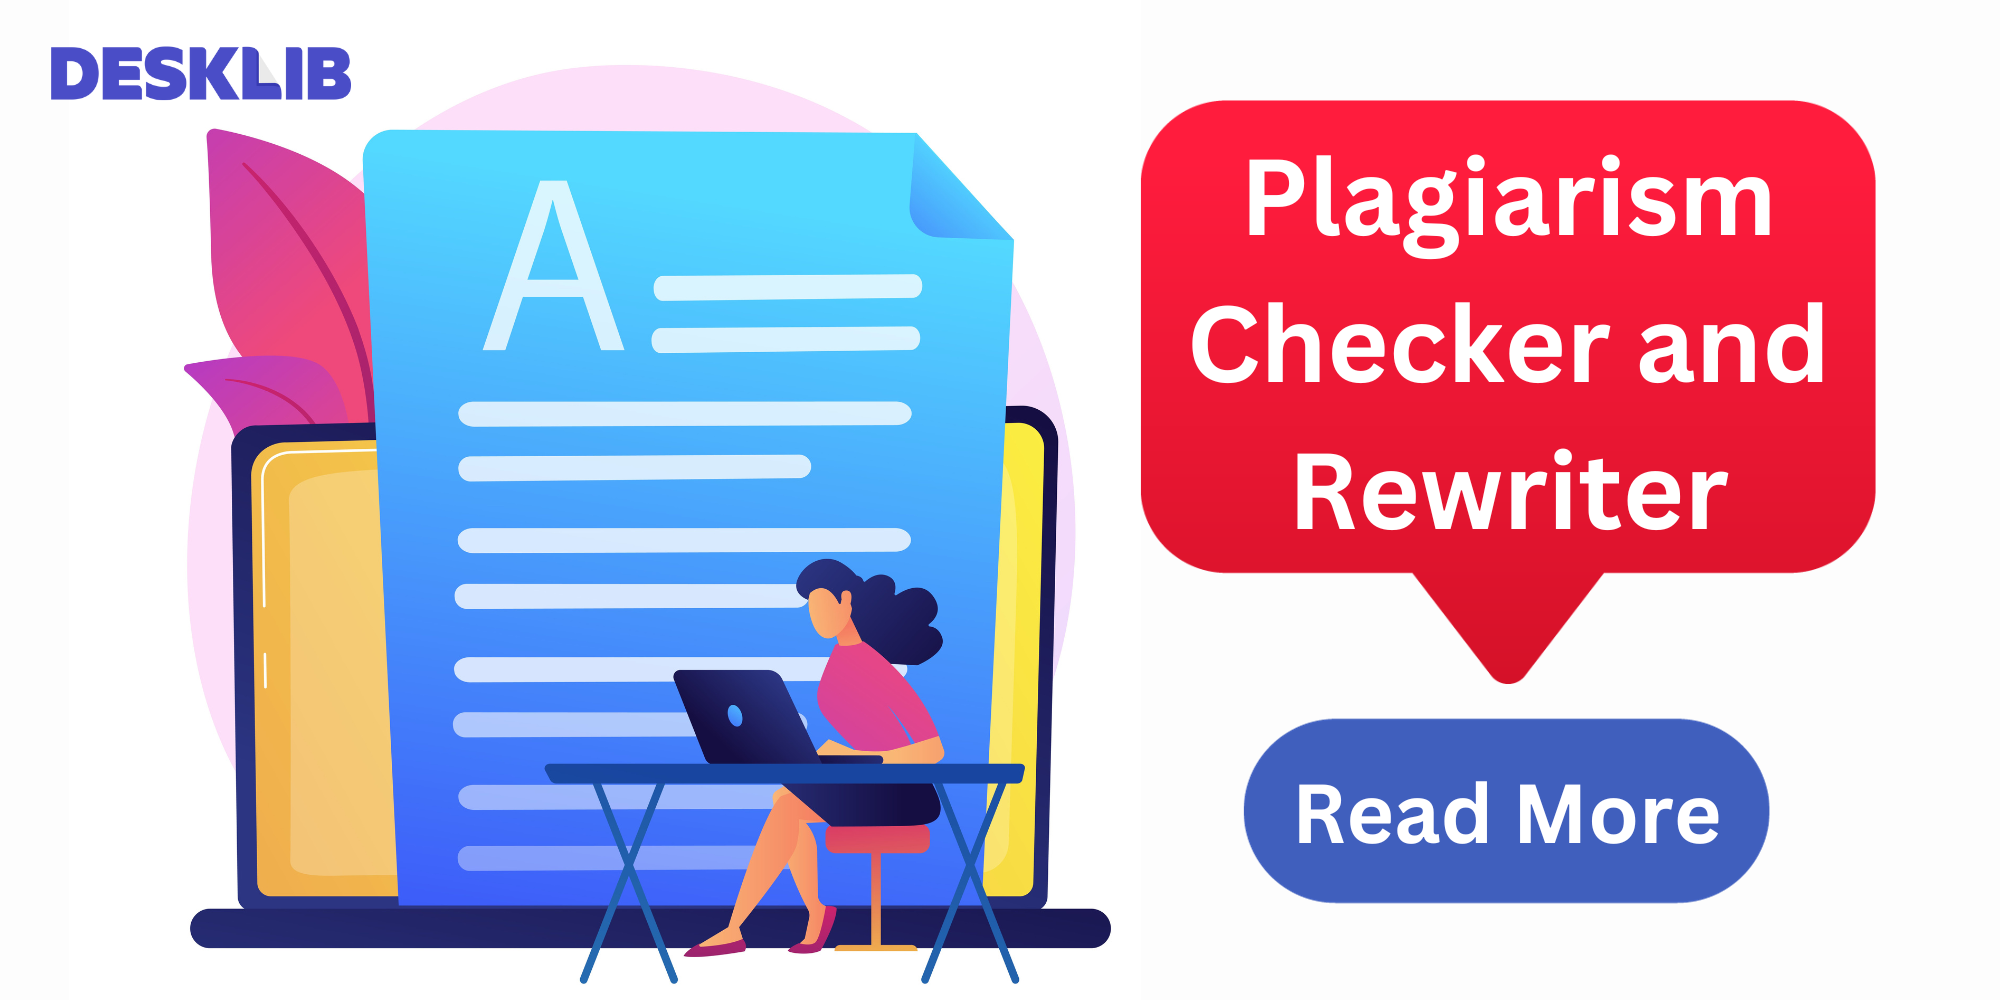 Plagiarism Checker and Rewriter tool